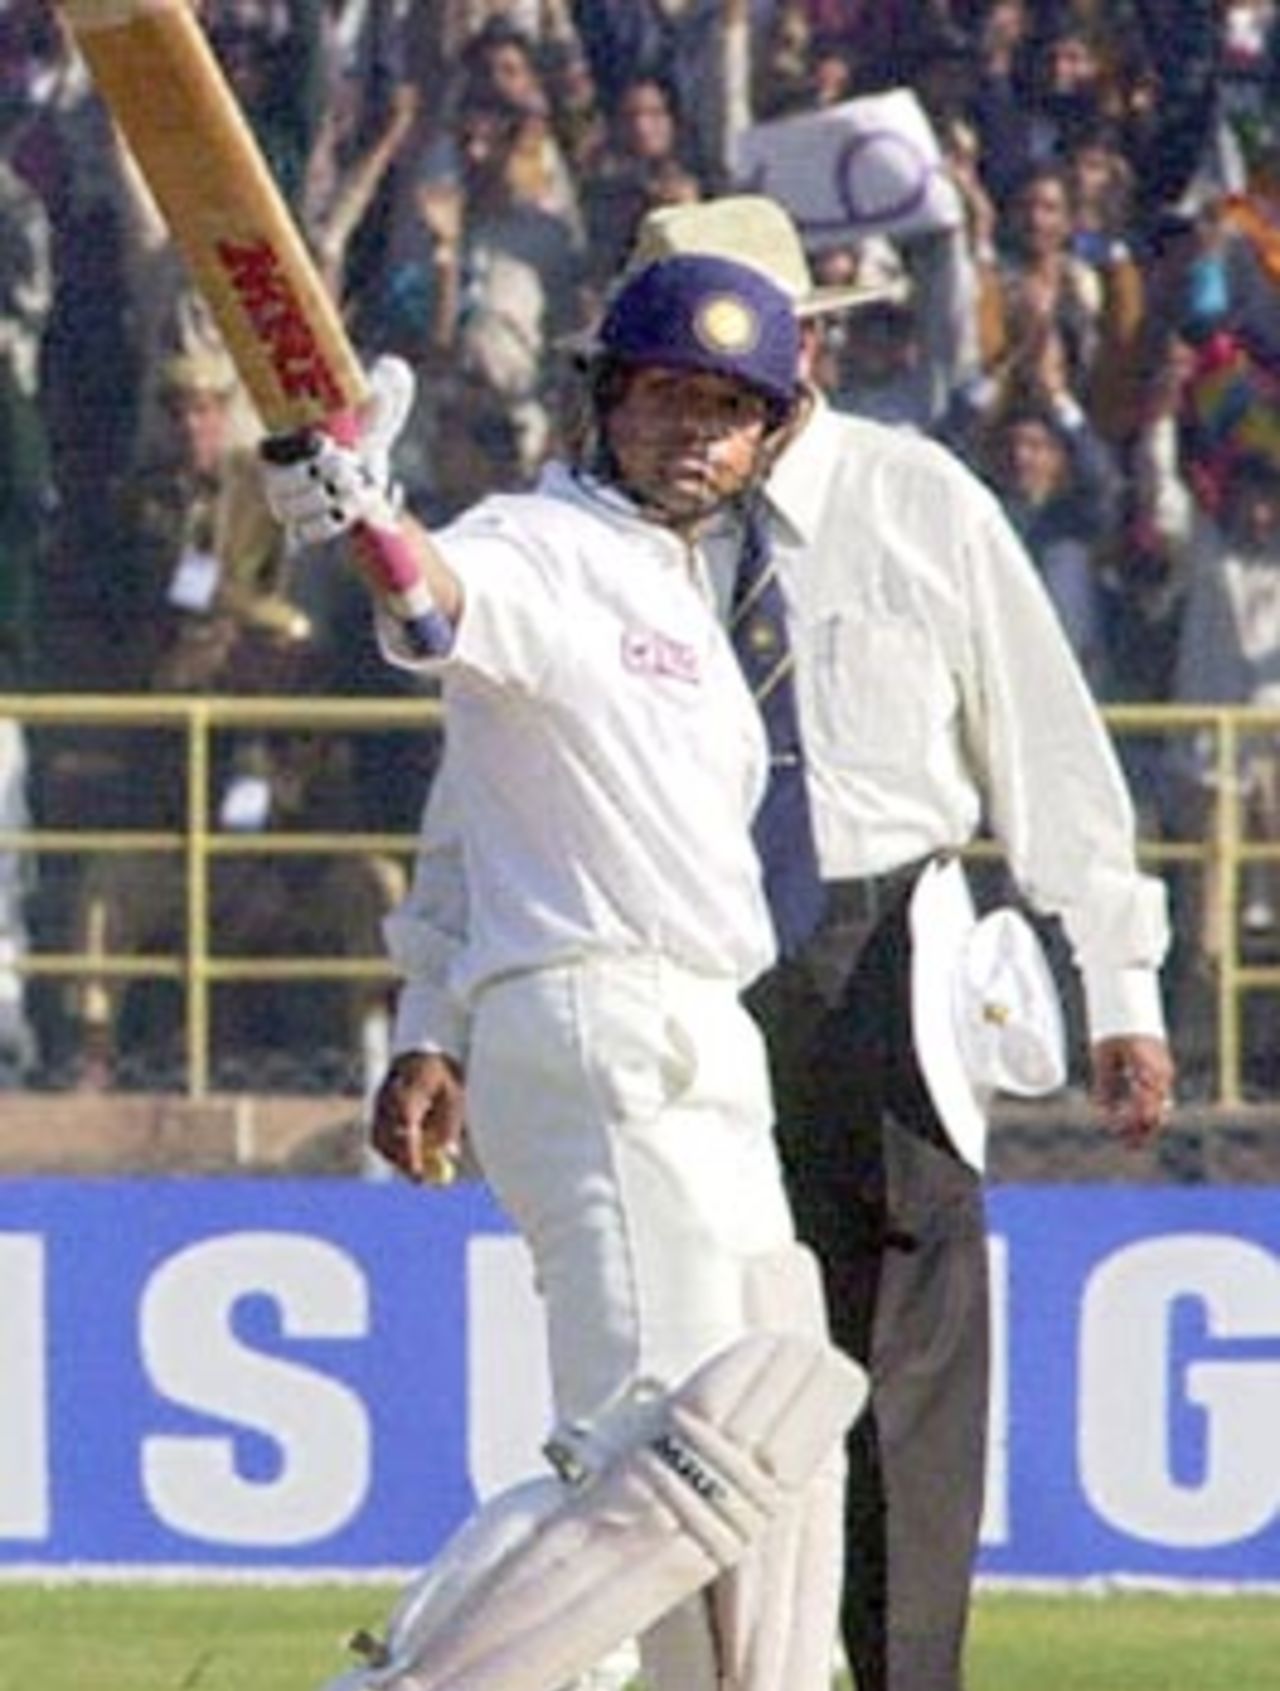 Indian ace batsman Sachin Tendulkar raises his bat to acknowledge the cheering crowd after scoring a century during the third one-day international cricket match against Zimbabwe at Jodhpur, 08 December 2000. Tendulkar hit 146 off 153 balls as India piled up 283-8 from 50 overs in the one-day competition against Zimbabwe. The right-hander hit 15 boundaries and two sixes in his 27th one-day hundred, almost the most by any batsman in the shorter version of the game.